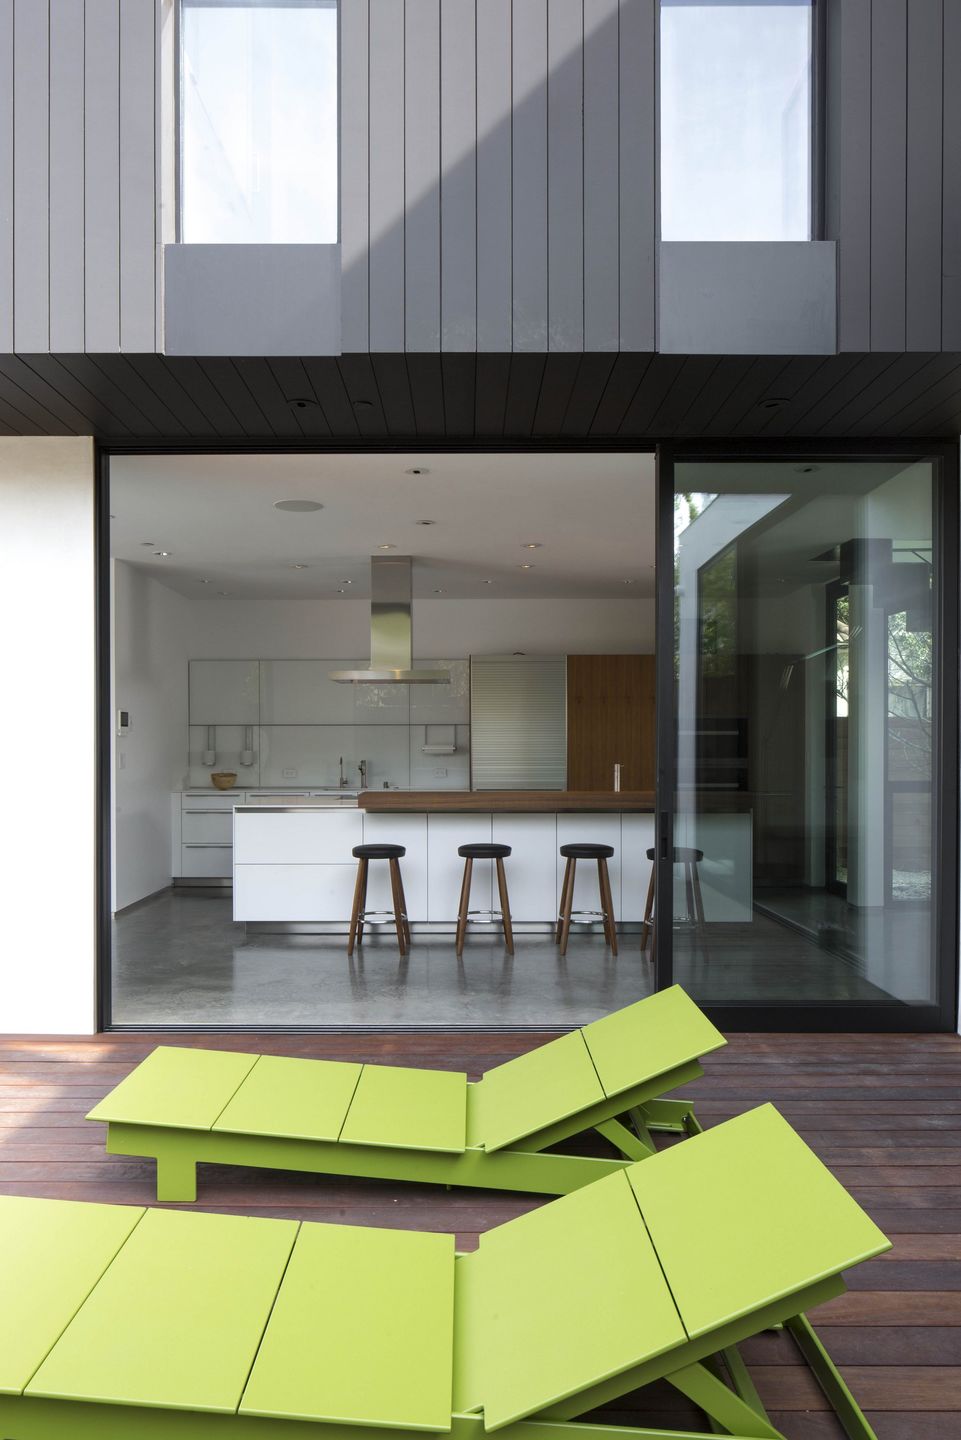 Two green chairs on a terrace and the kitchen behind